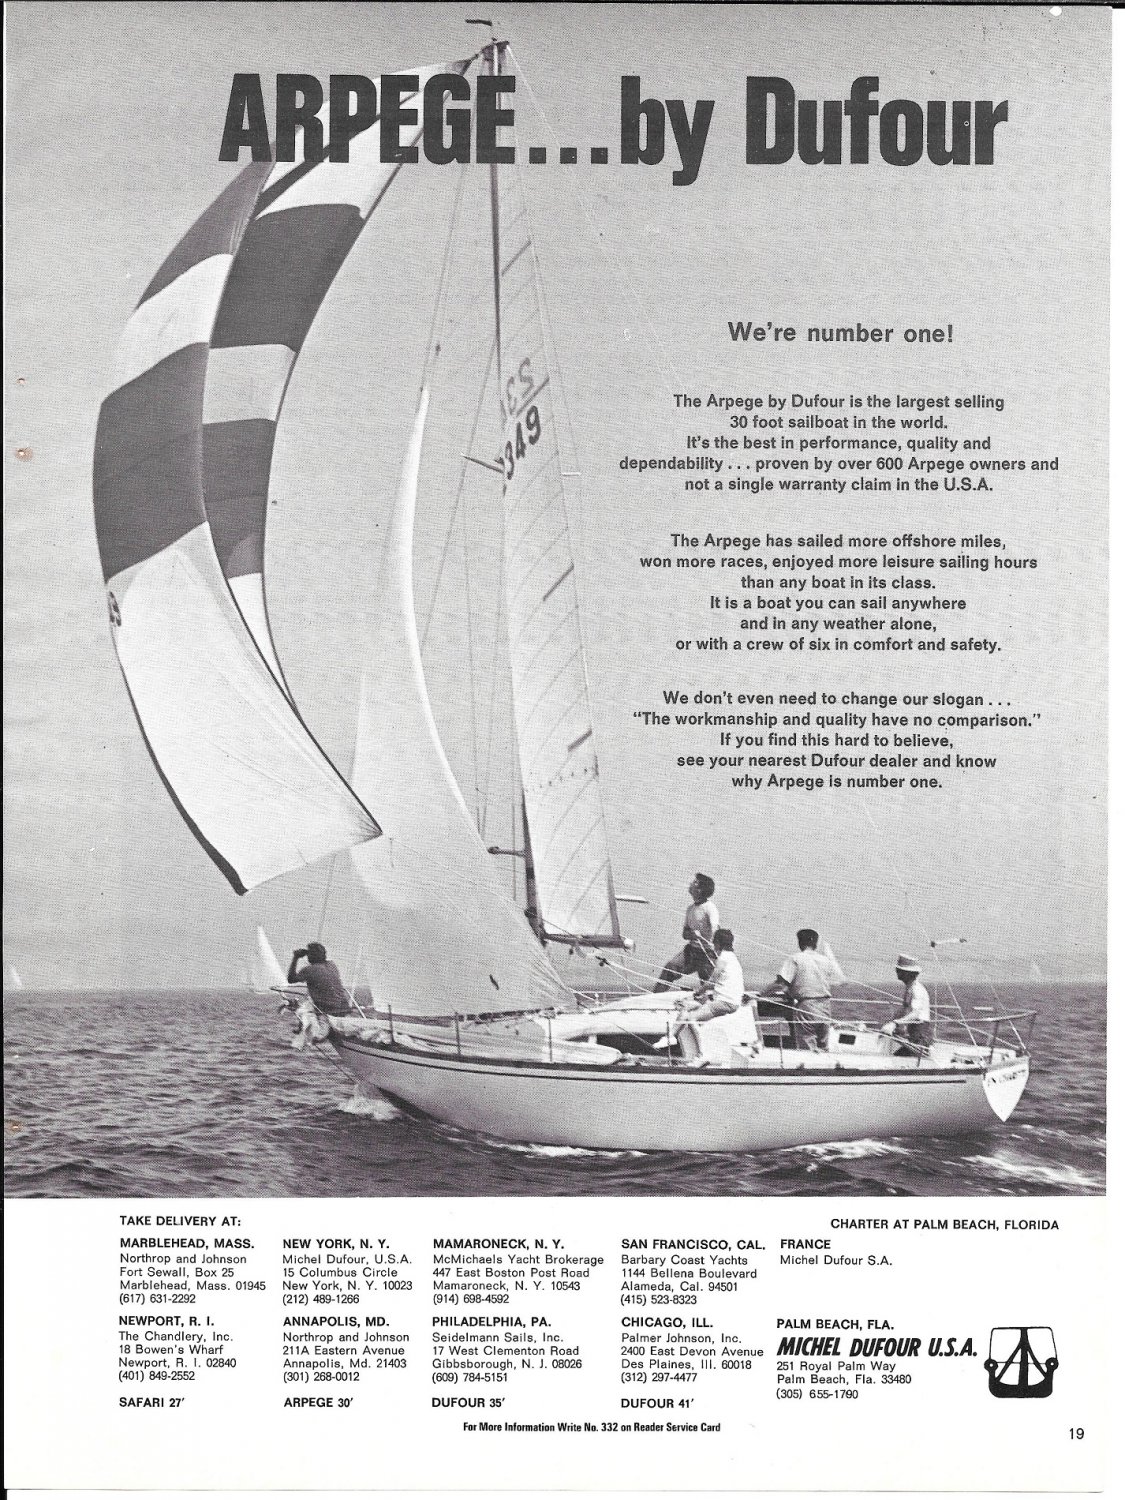 1971 Michel Dufour USA Yachts Ad- Nice Photo of 30' Arpege